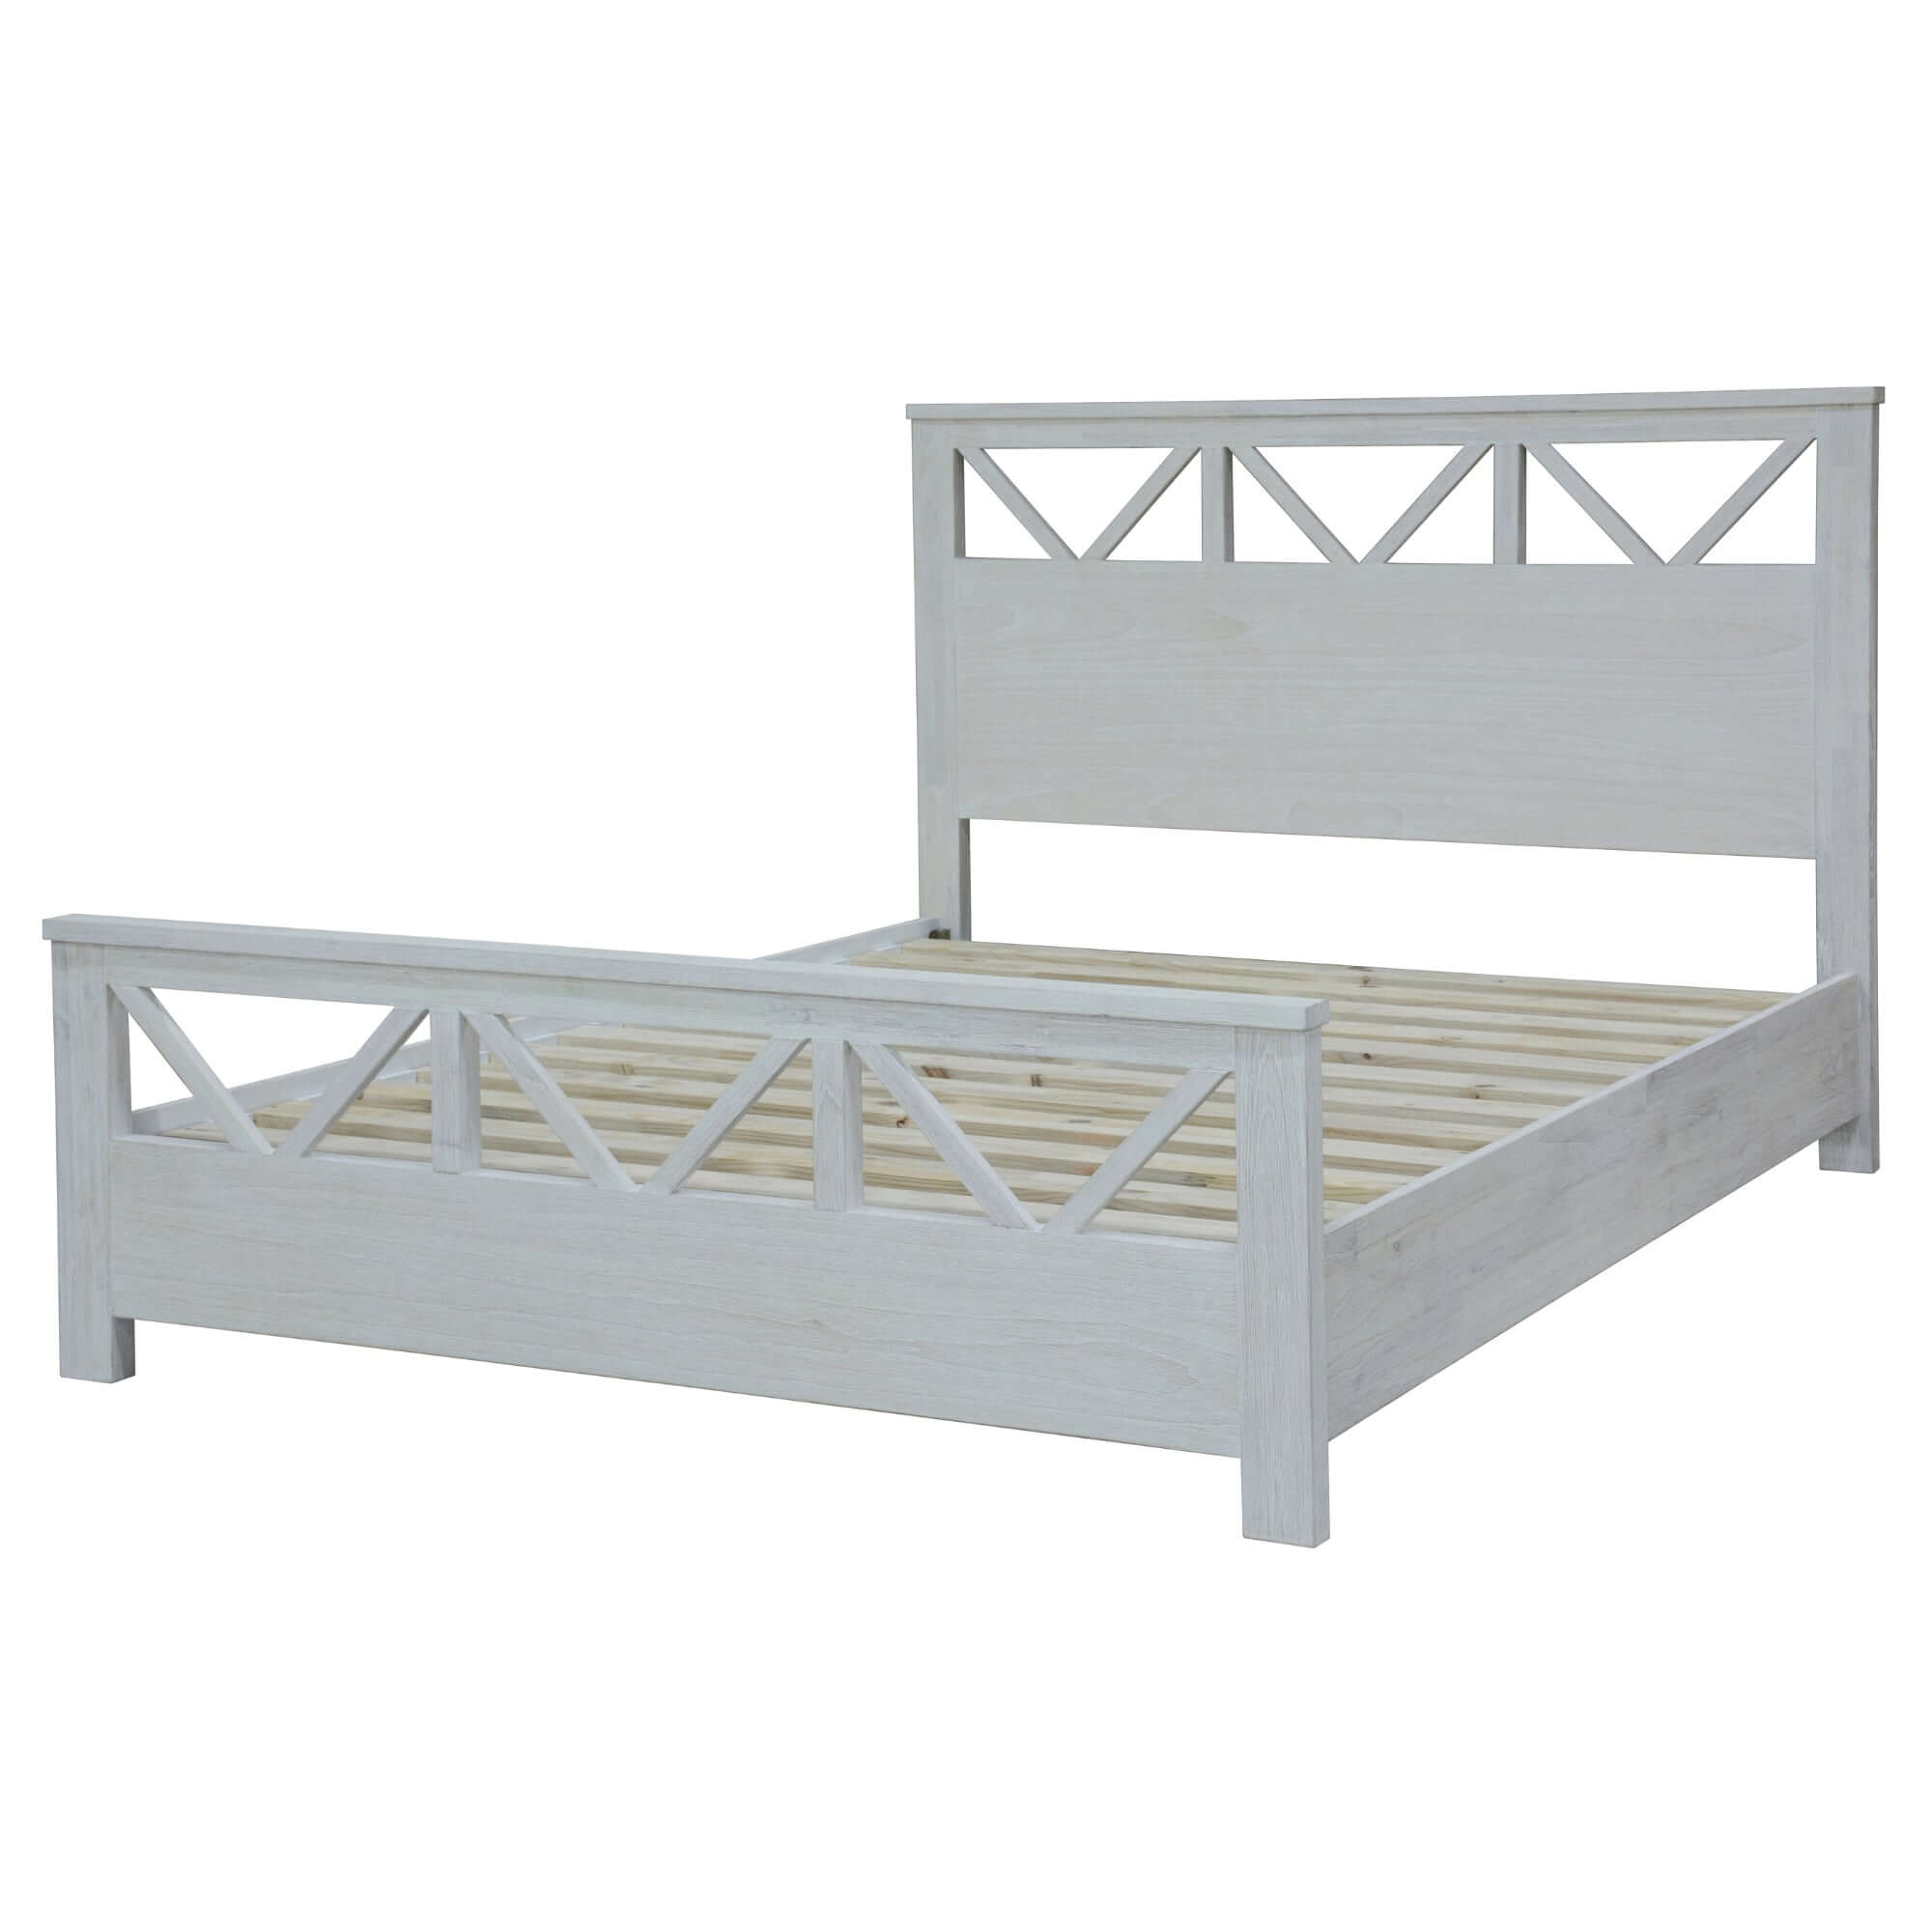 Myer 4pc Double Bed Bedroom Suite - White Wash-Upinteriors